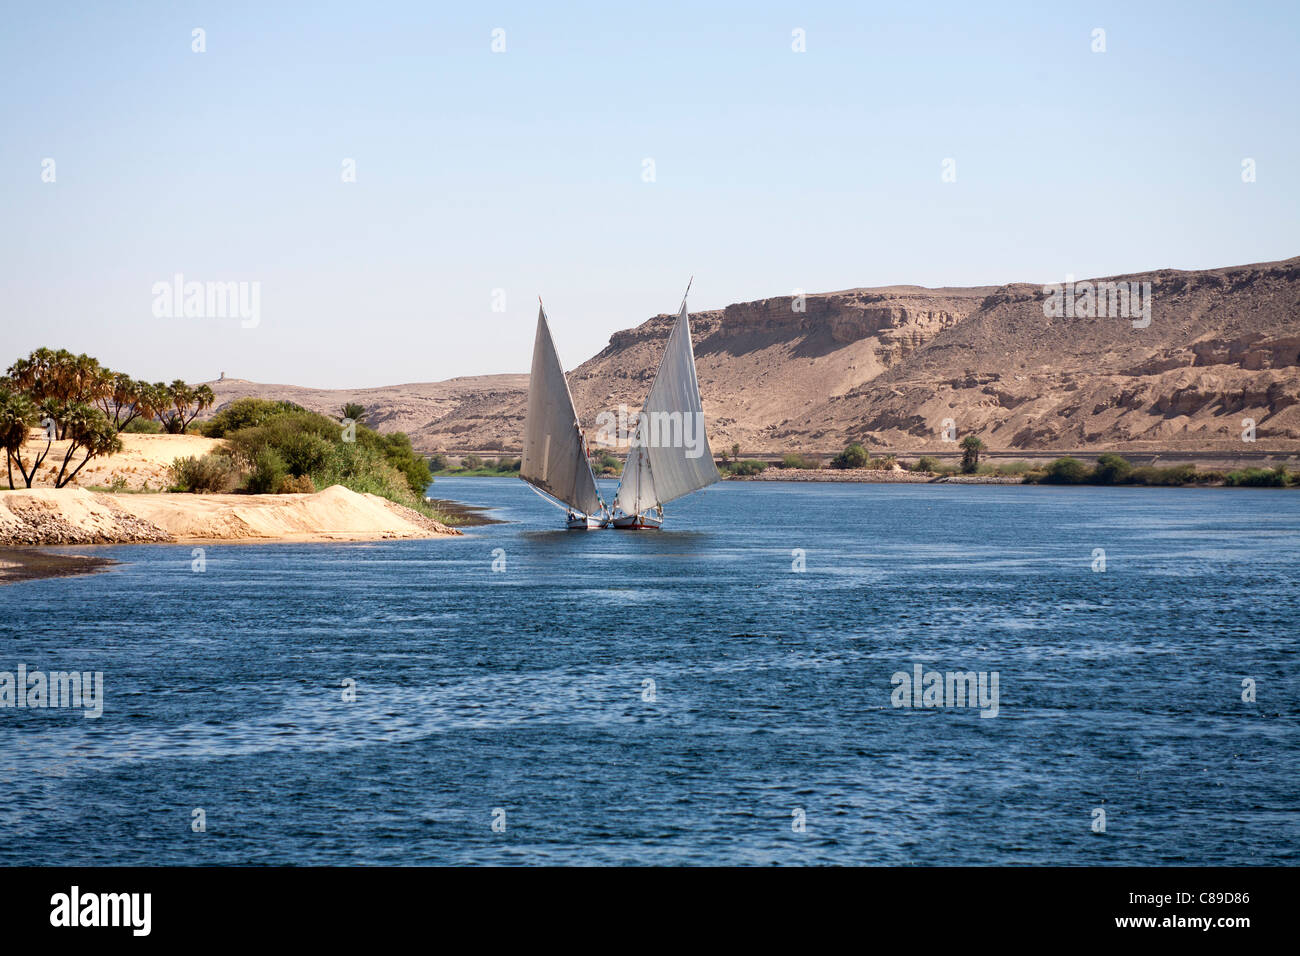 Two Nile fellucas sailing to camera in tandem one tied to the other, rounding a bend in the river with mountains in background Stock Photo